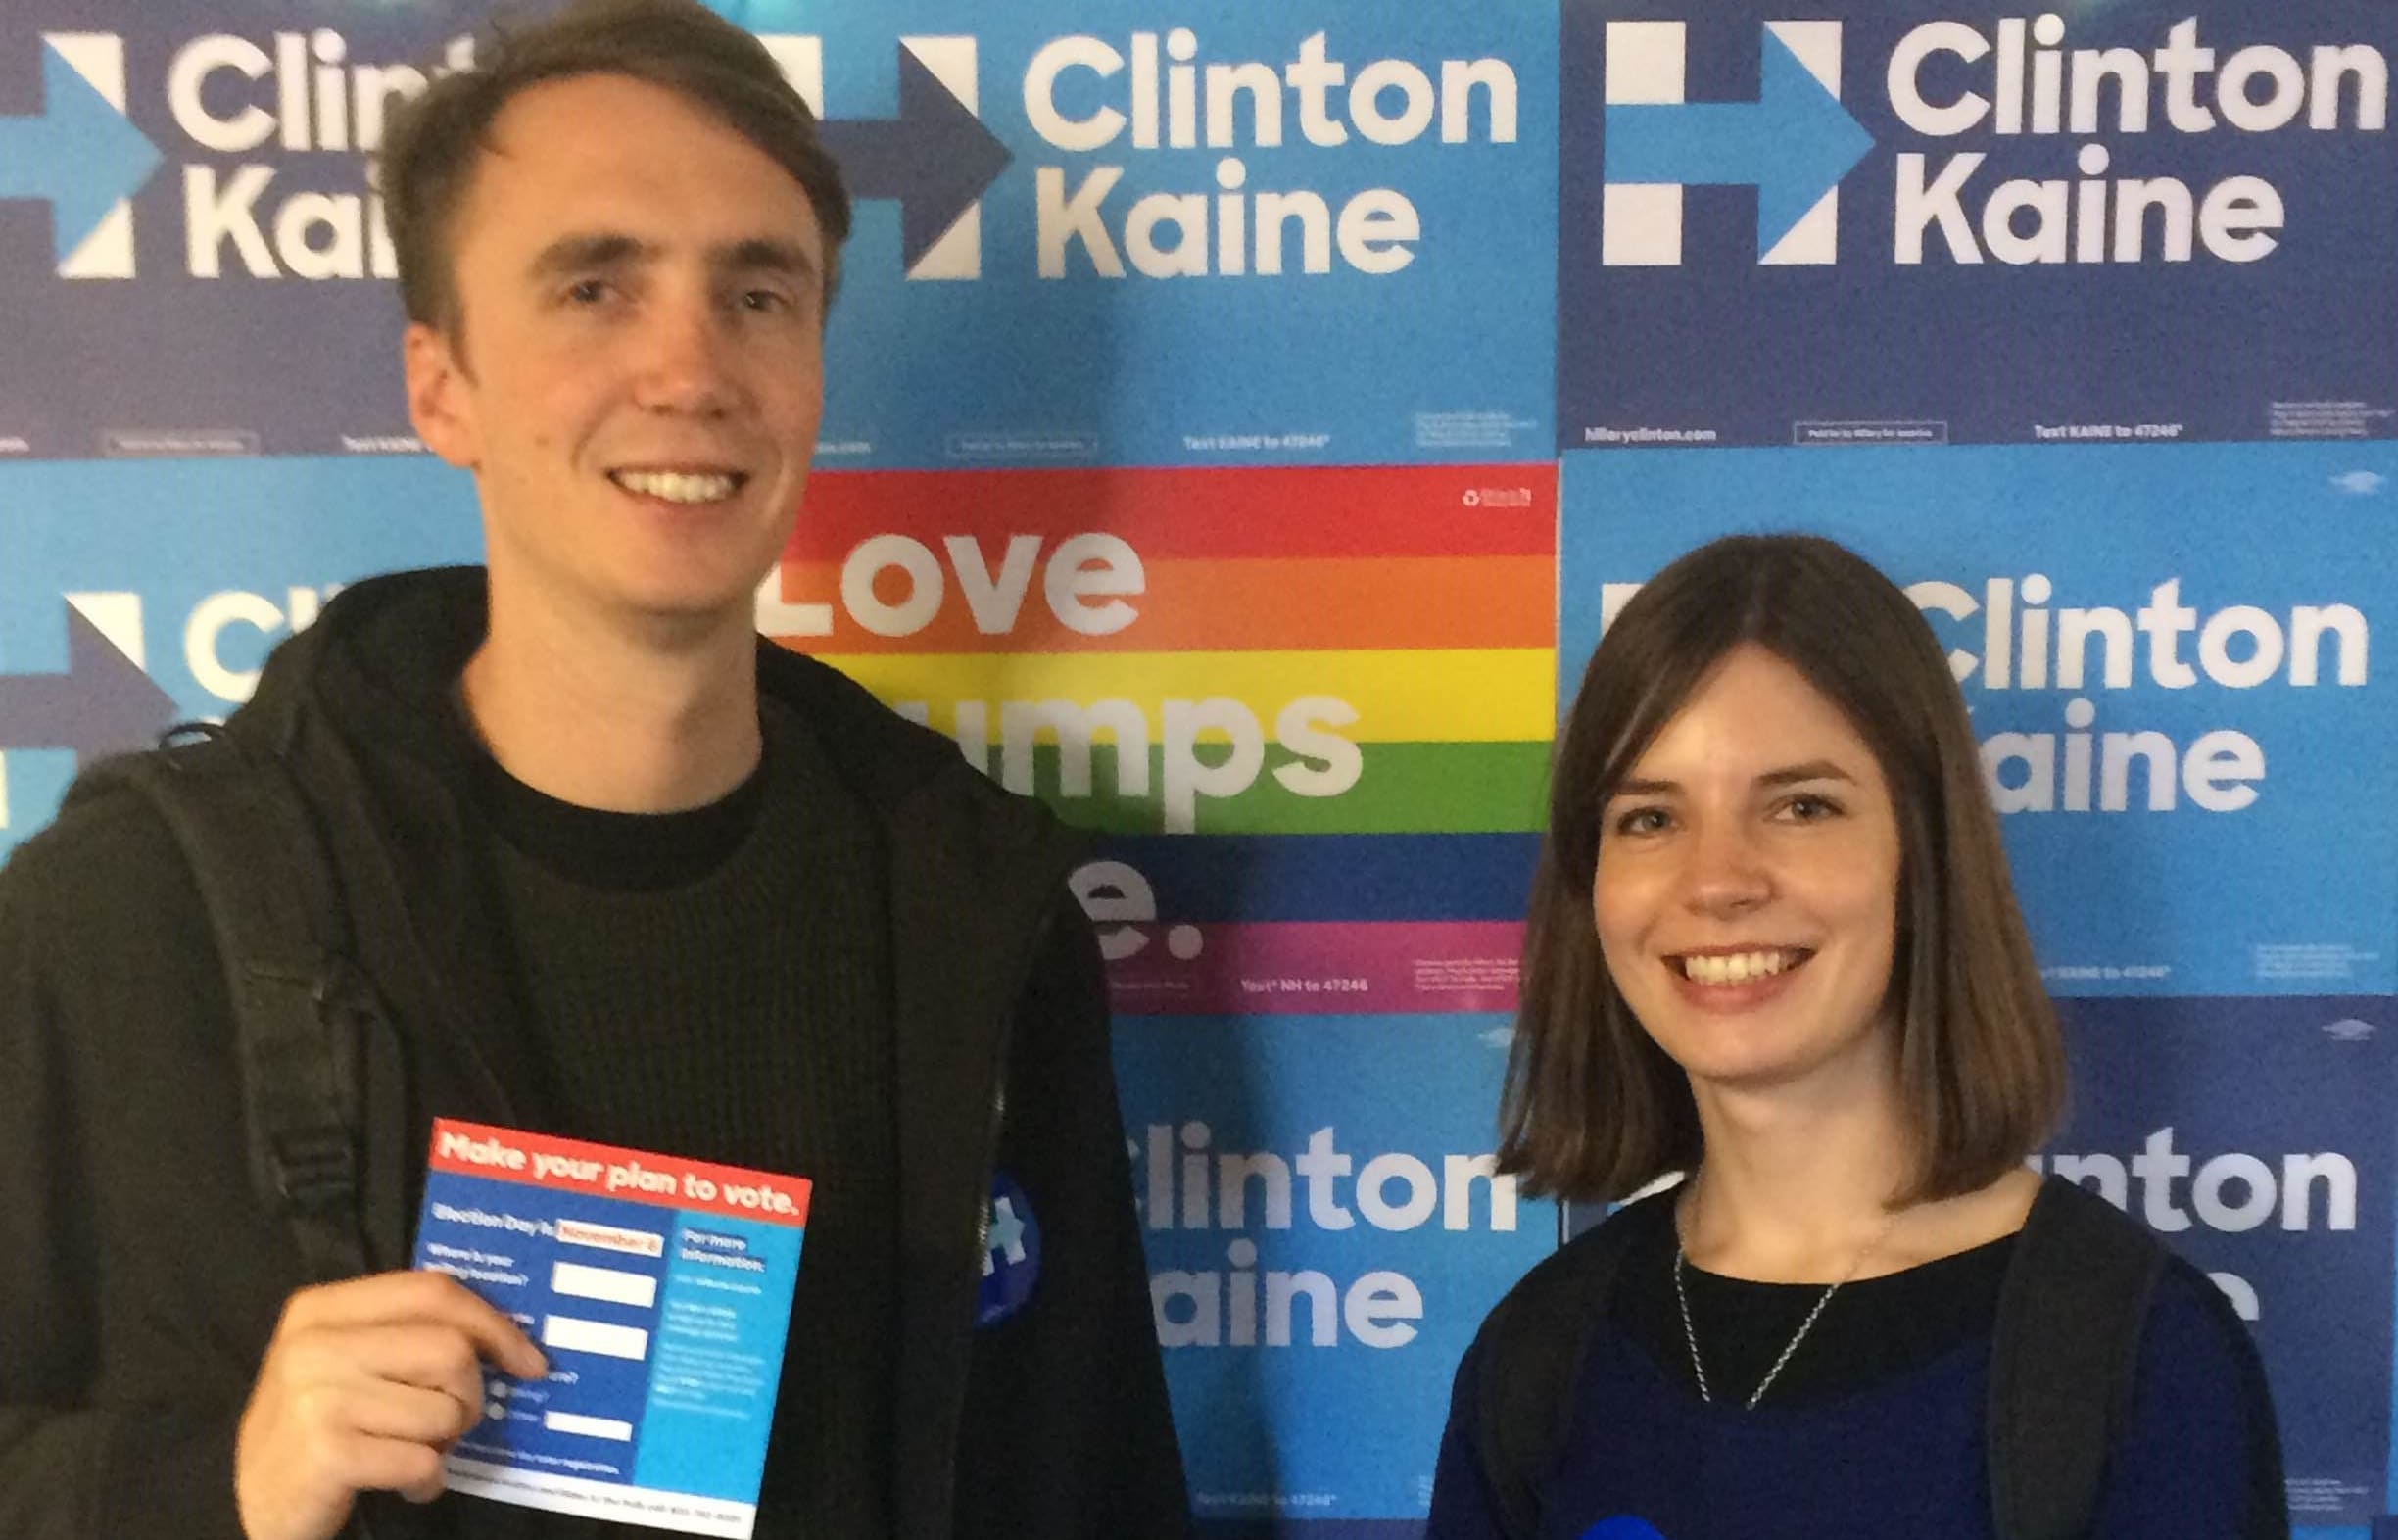 New Zealanders Josh Pemberton and Alice Osman, who are both students at Harvard Law School, spent a day canvassing Democrat voters in New Hampshire.